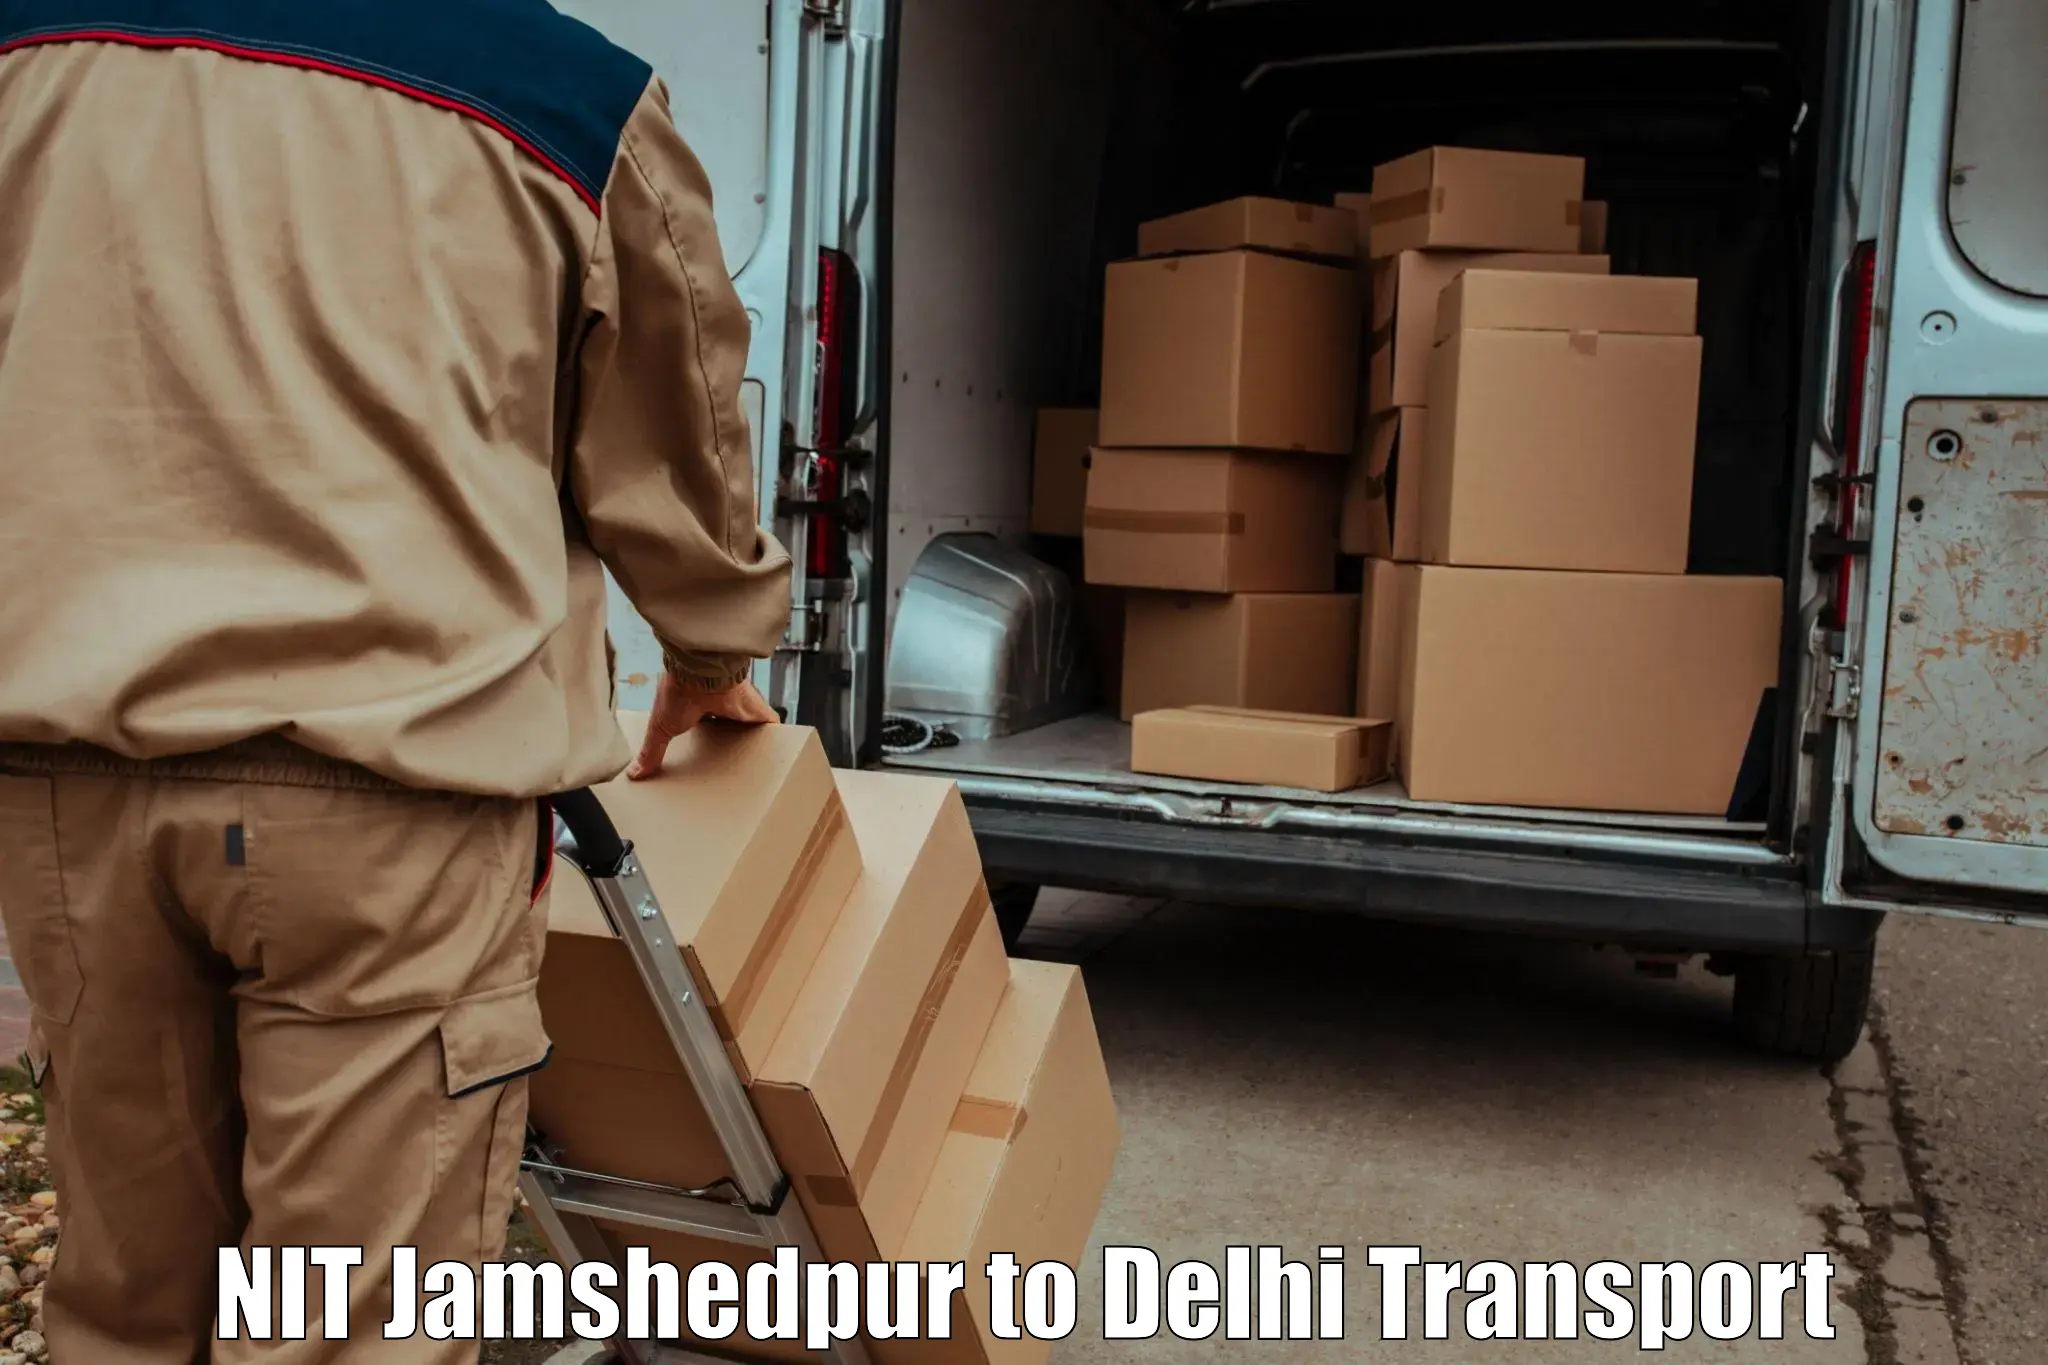 Daily transport service NIT Jamshedpur to Lodhi Road